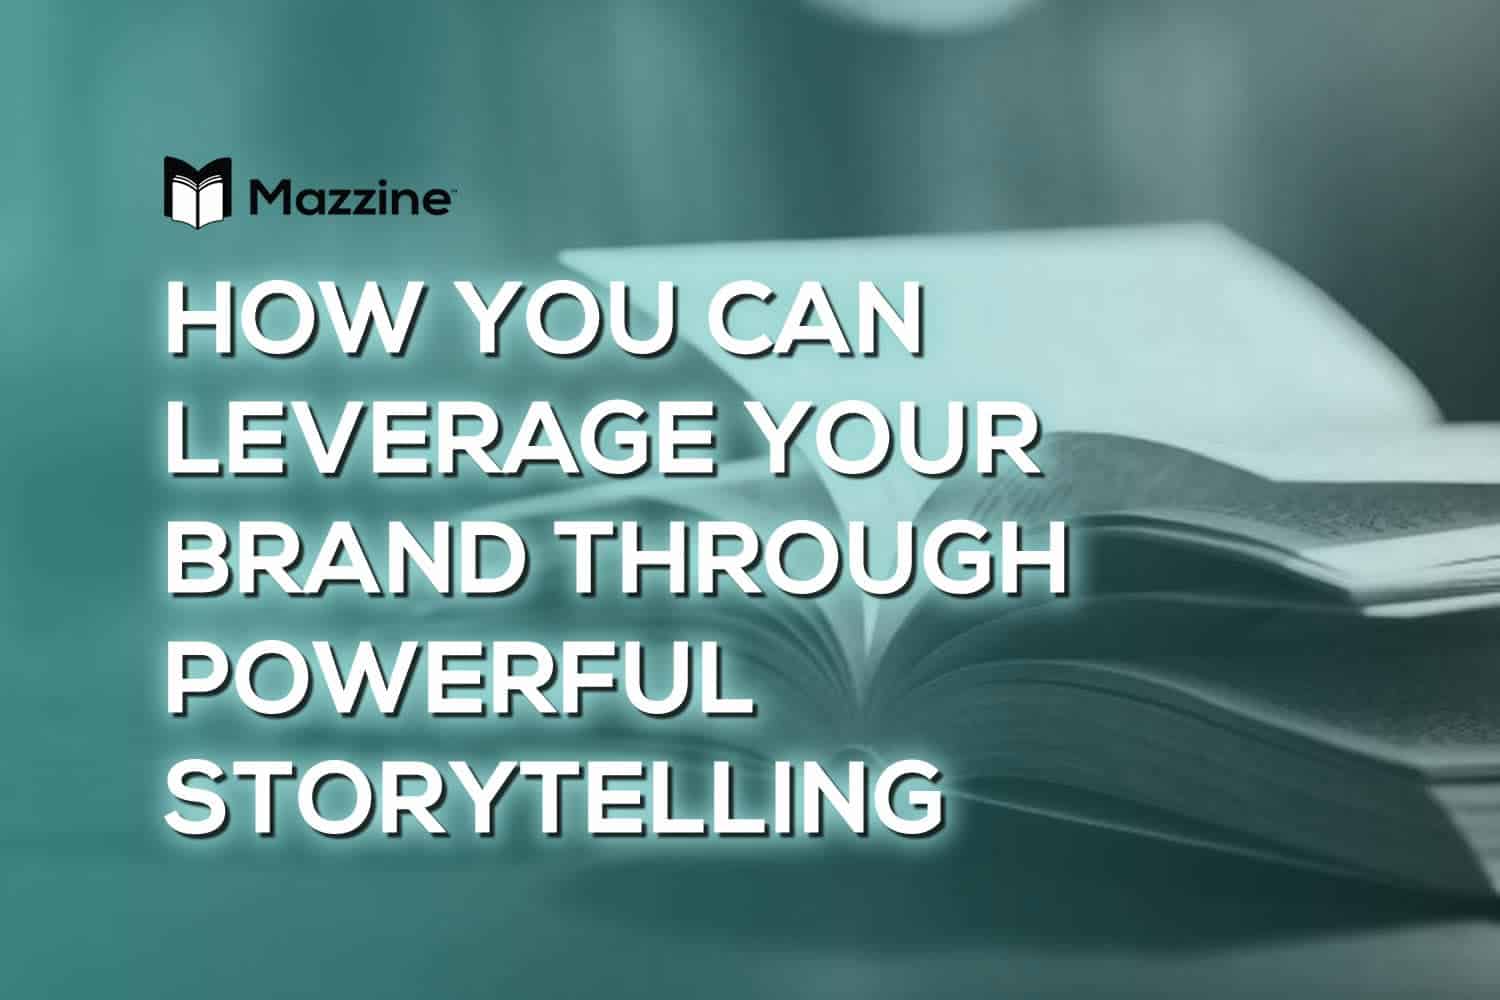 How You Can Leverage Your Brand Through Powerful Storytelling